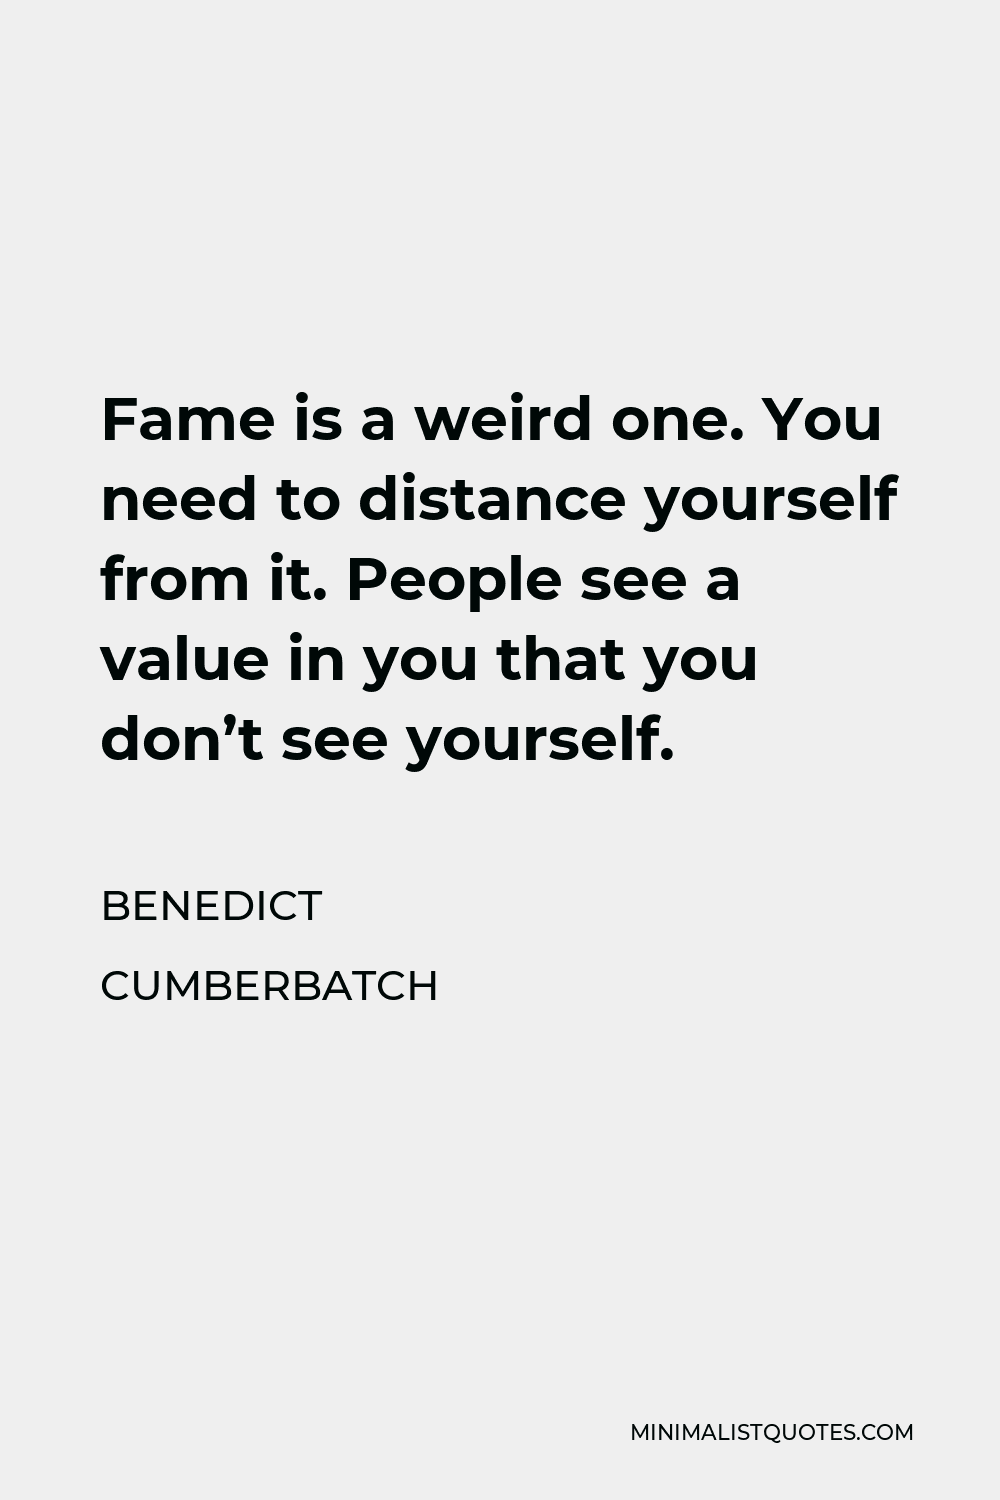 Benedict Cumberbatch Quote - Fame is a weird one. You need to distance yourself from it. People see a value in you that you don’t see yourself.